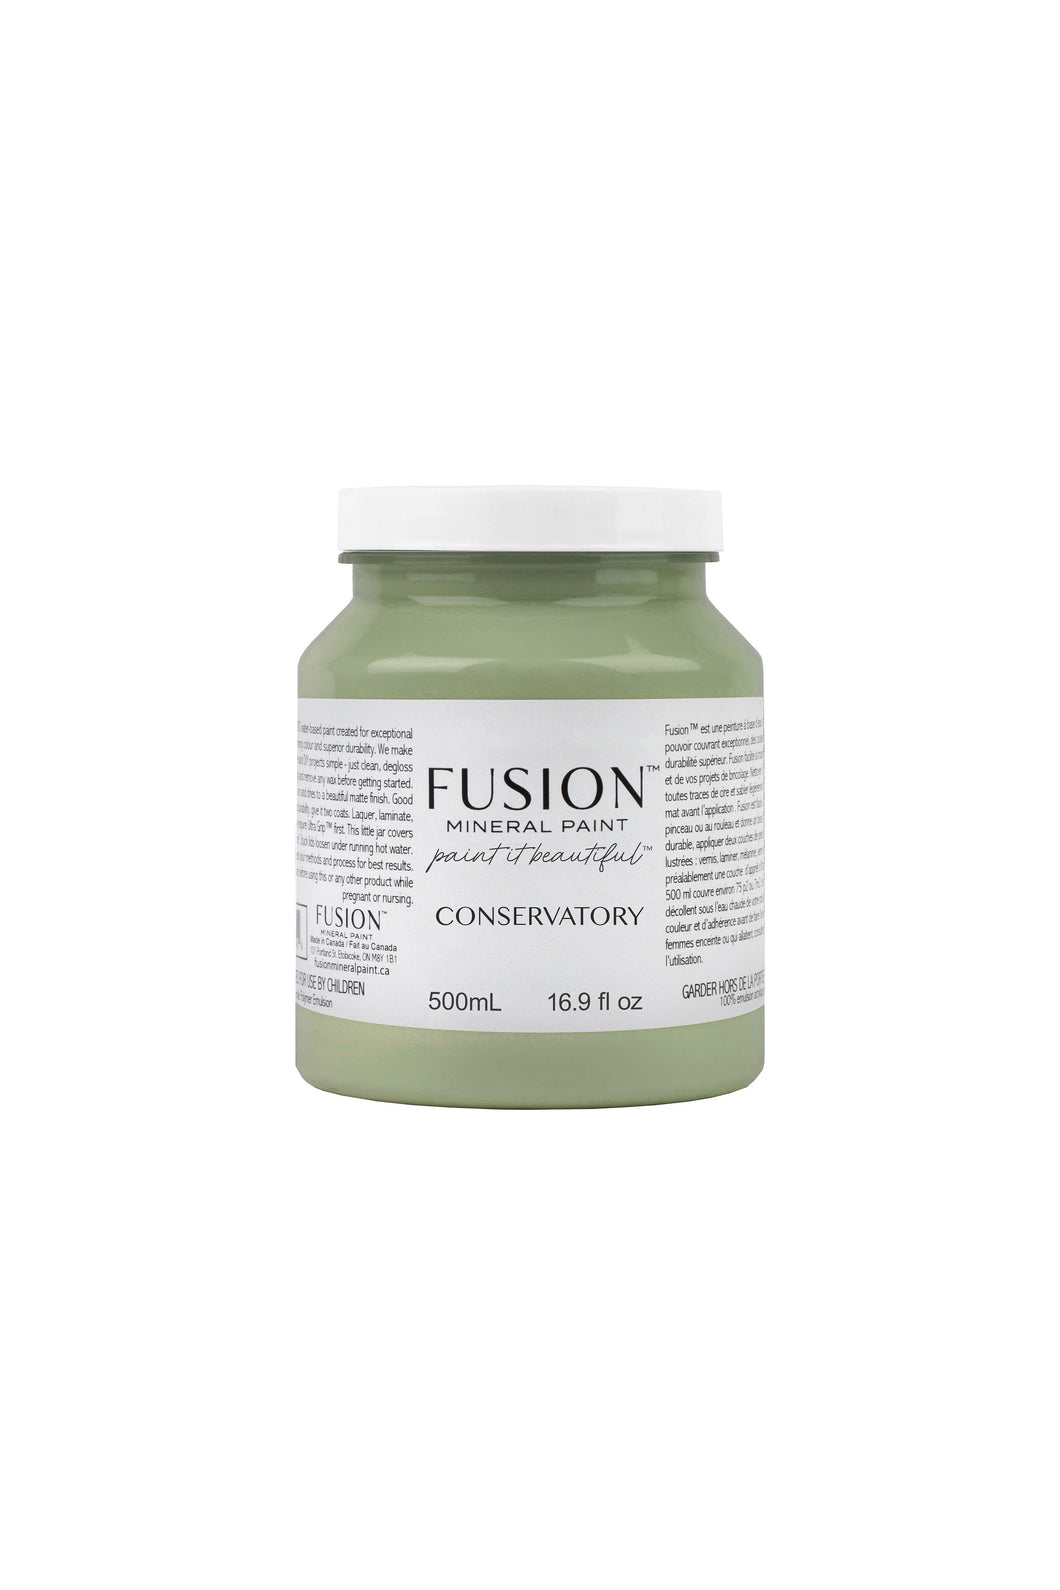 Fusion Mineral Paint - Conservatory 500 ml Jar